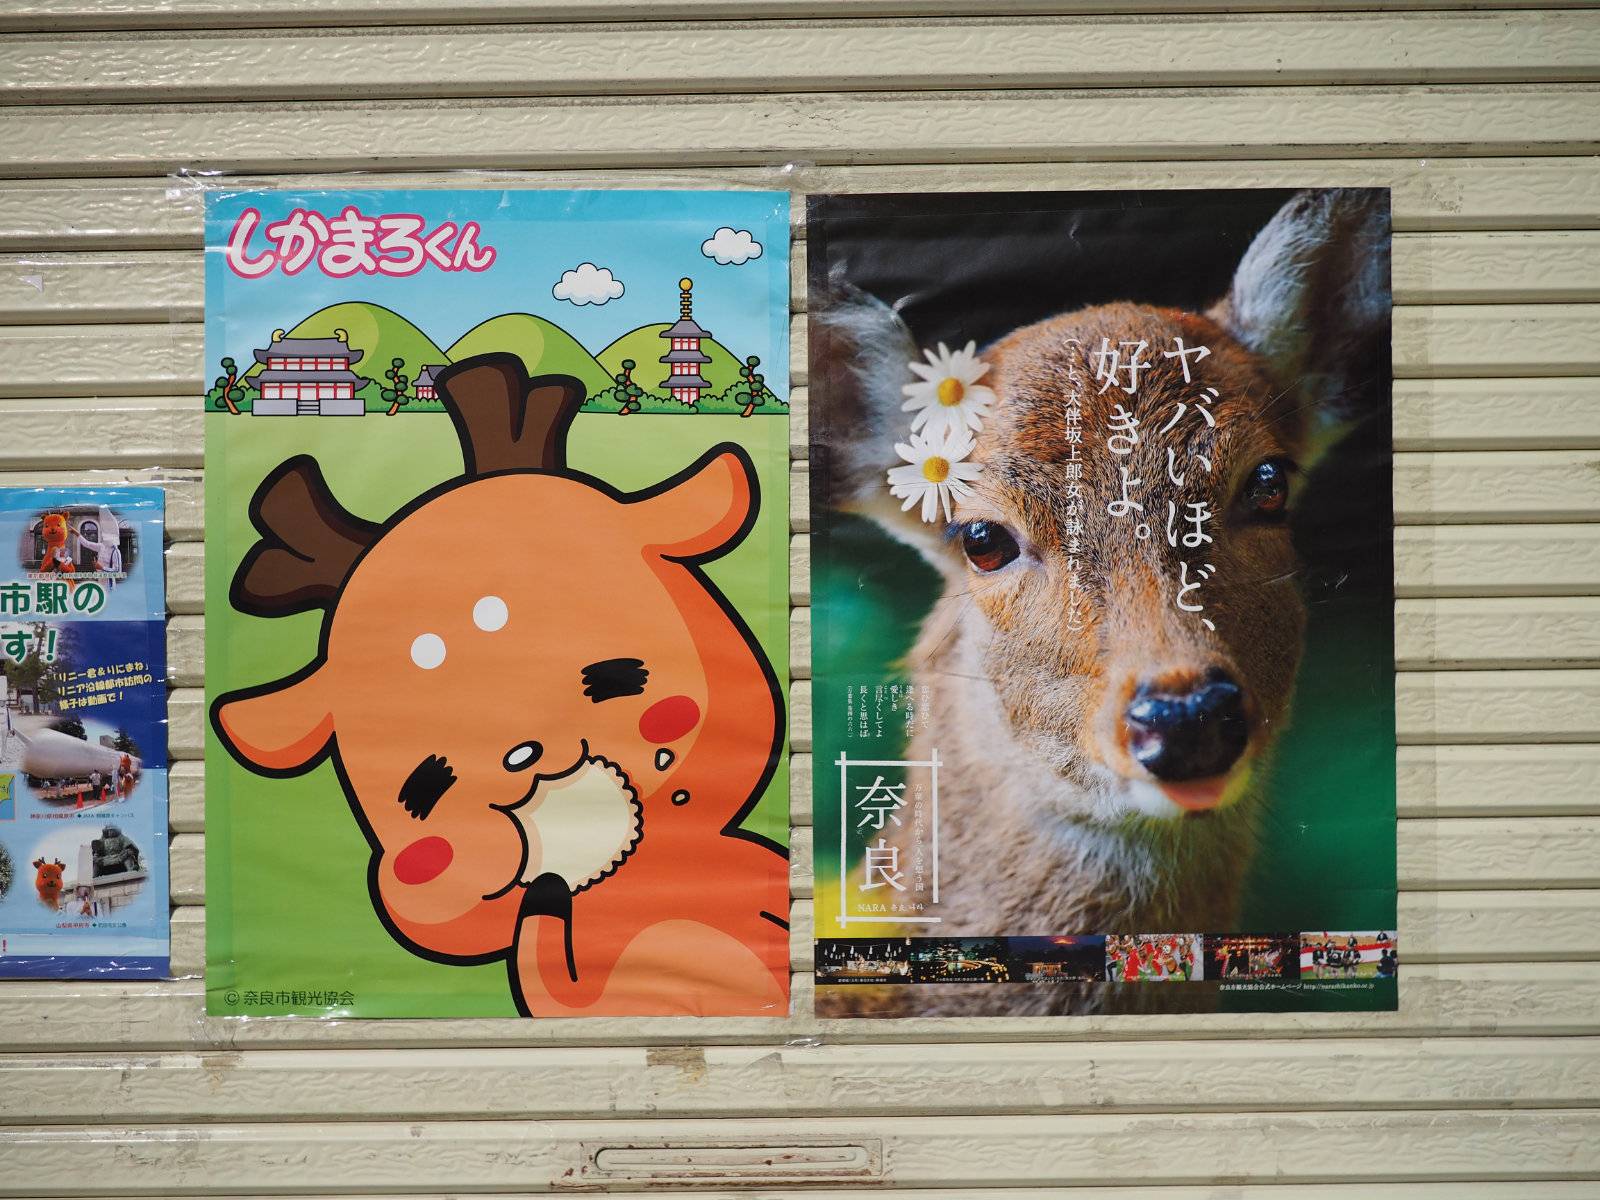 Poster of a cute cartoon deer, and a photo of the actual cute deer